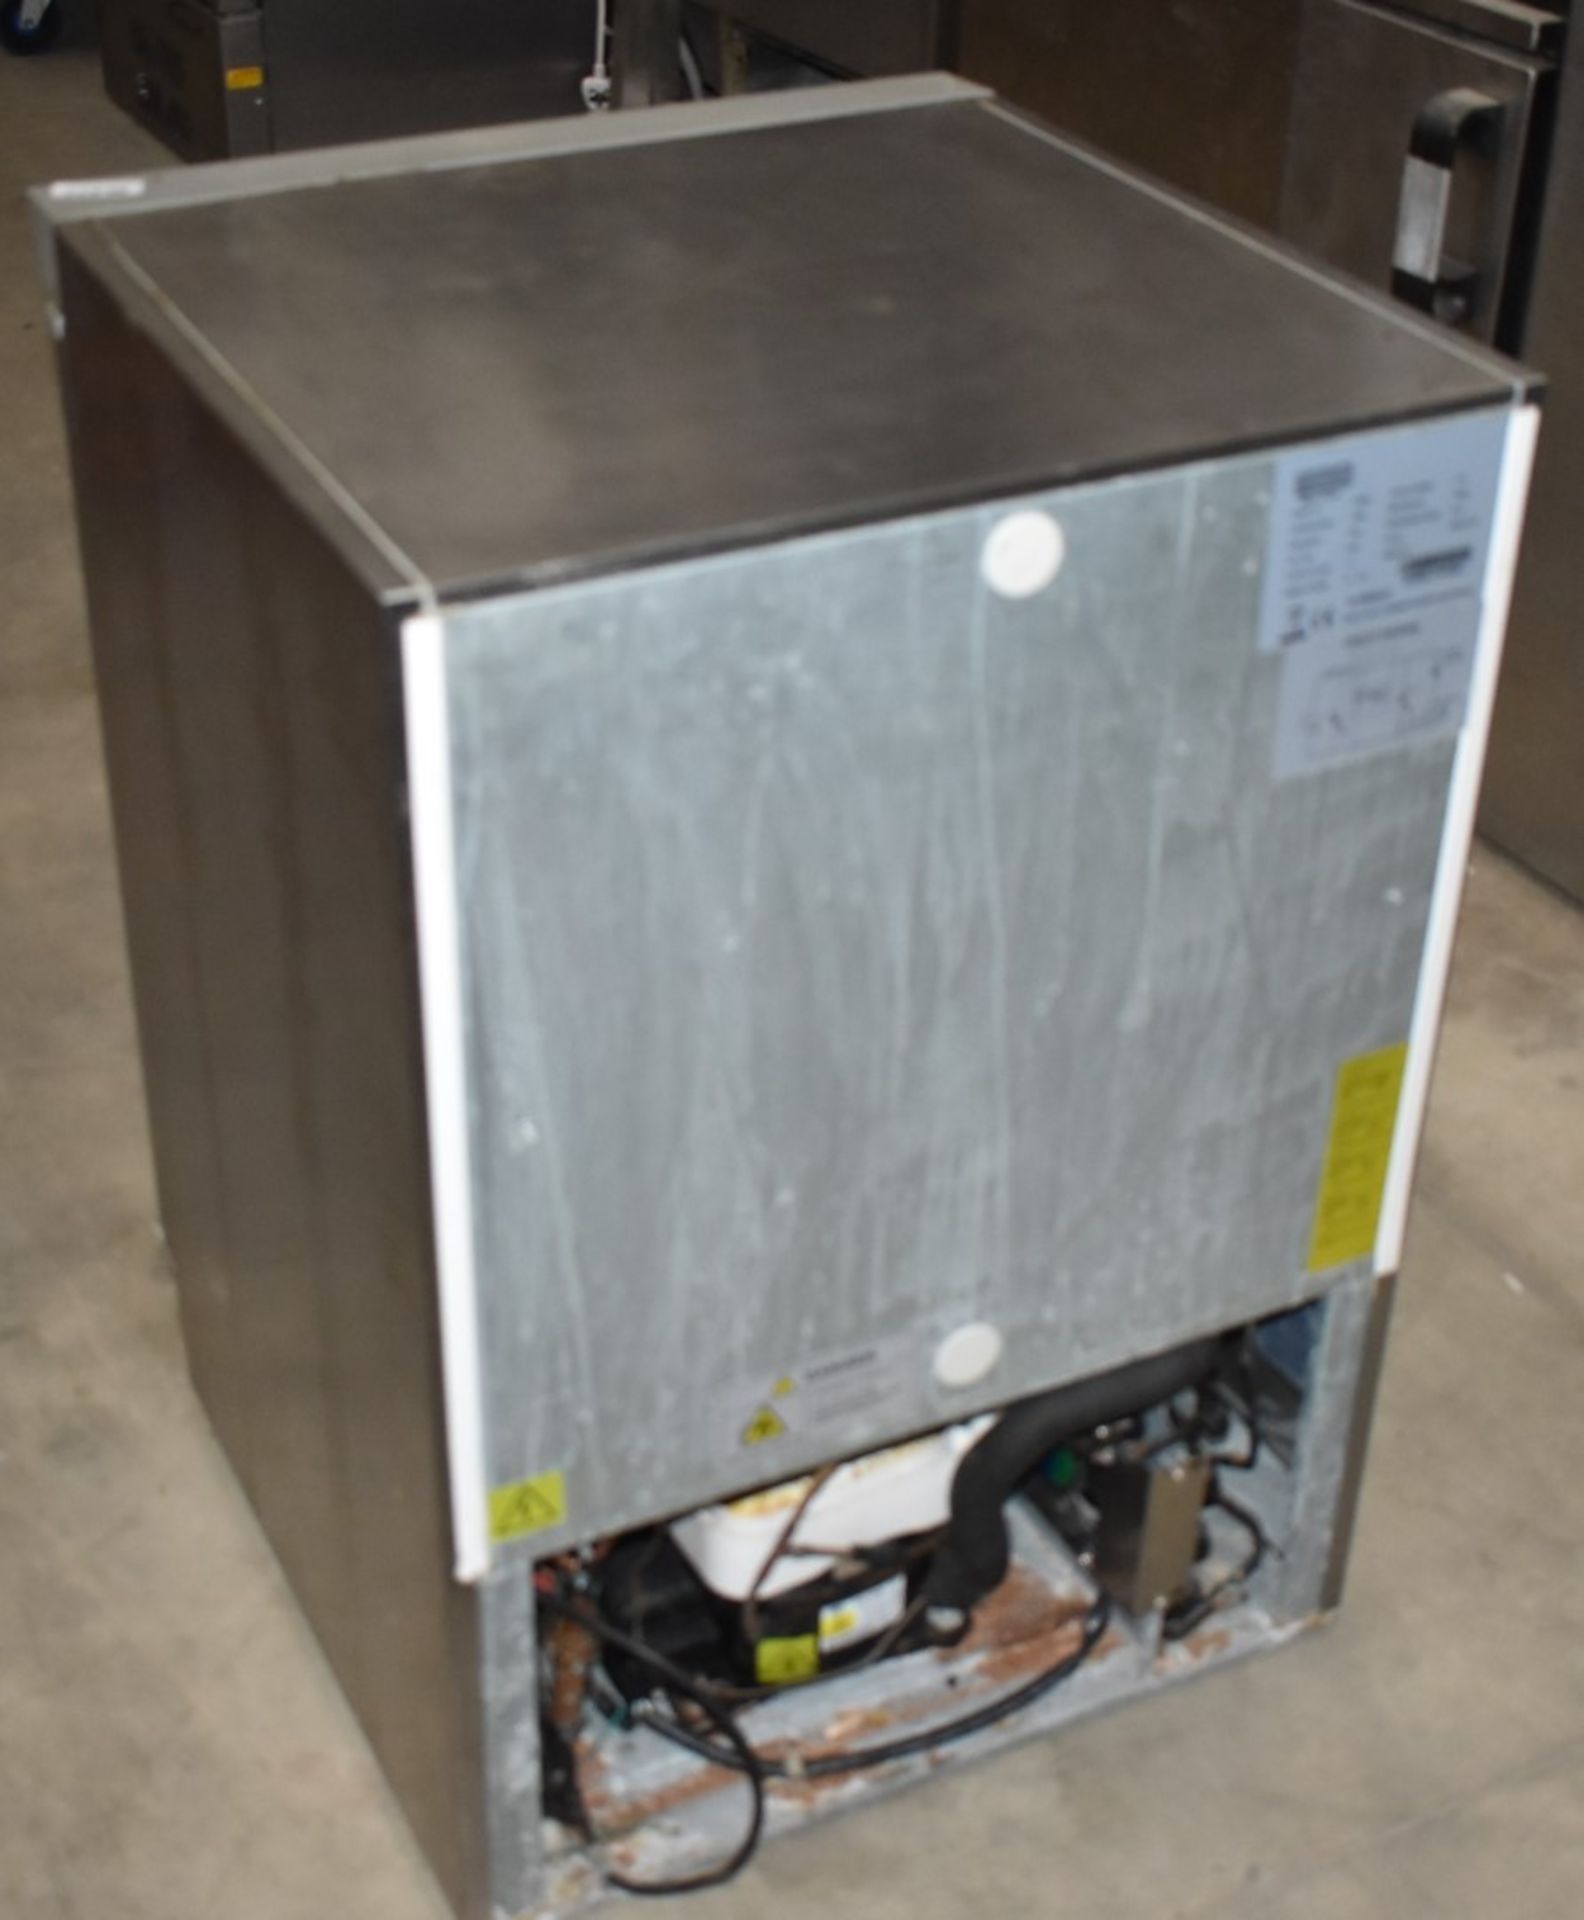 1 x Polar CD080 Undercounter Stainless Steel Fridge - Recently Removed From a Restaurant Environment - Image 5 of 7